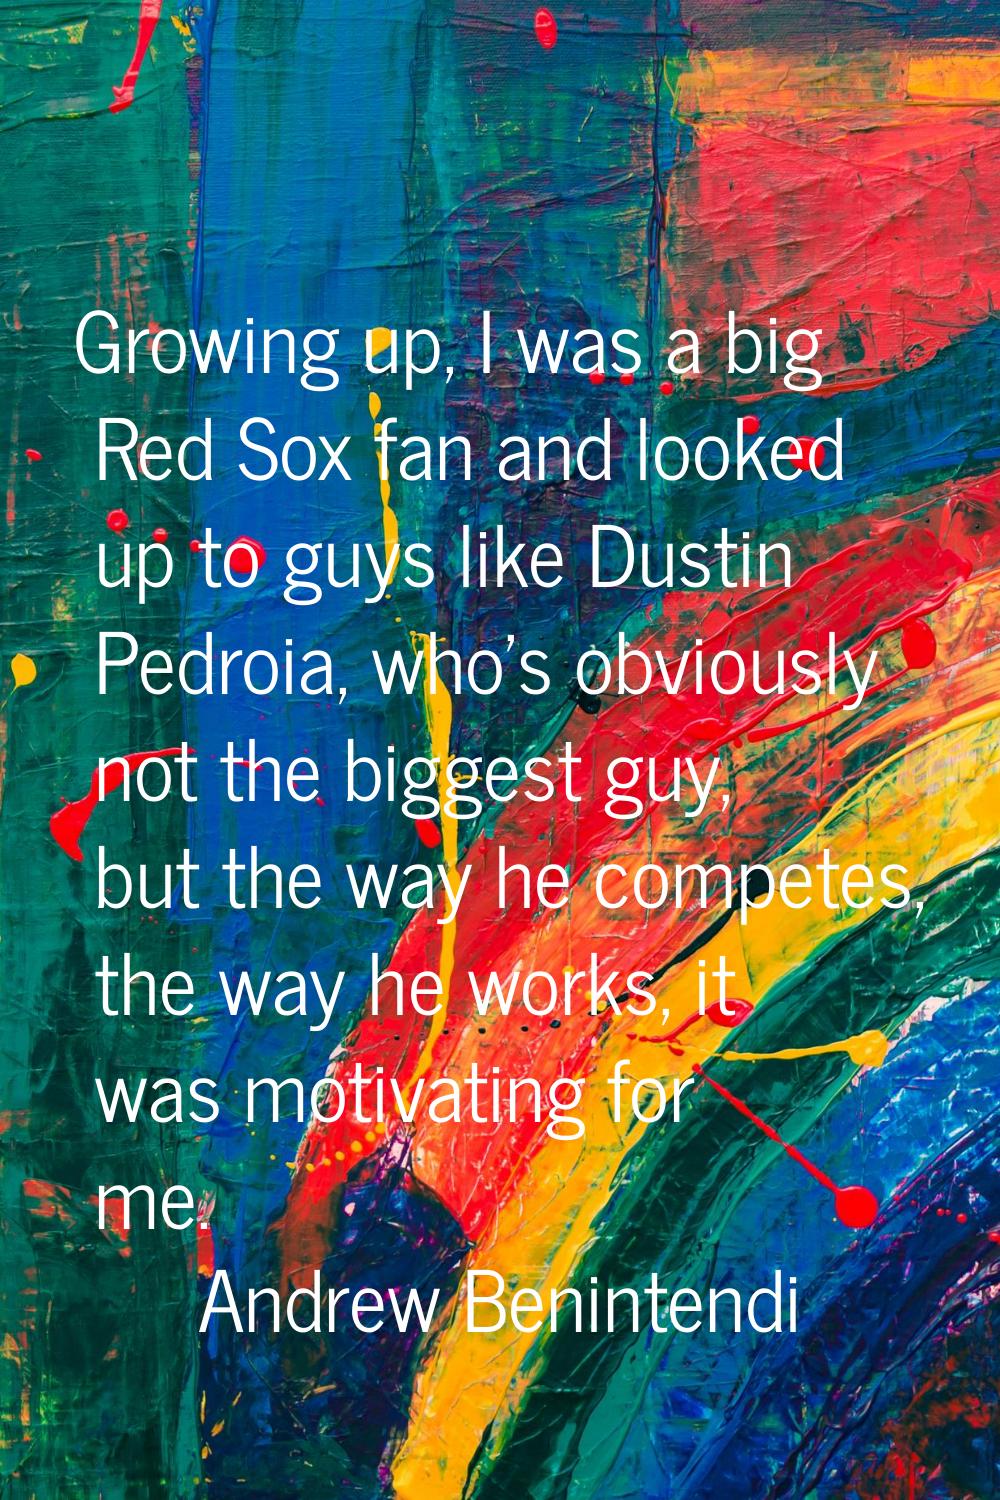 Growing up, I was a big Red Sox fan and looked up to guys like Dustin Pedroia, who's obviously not 